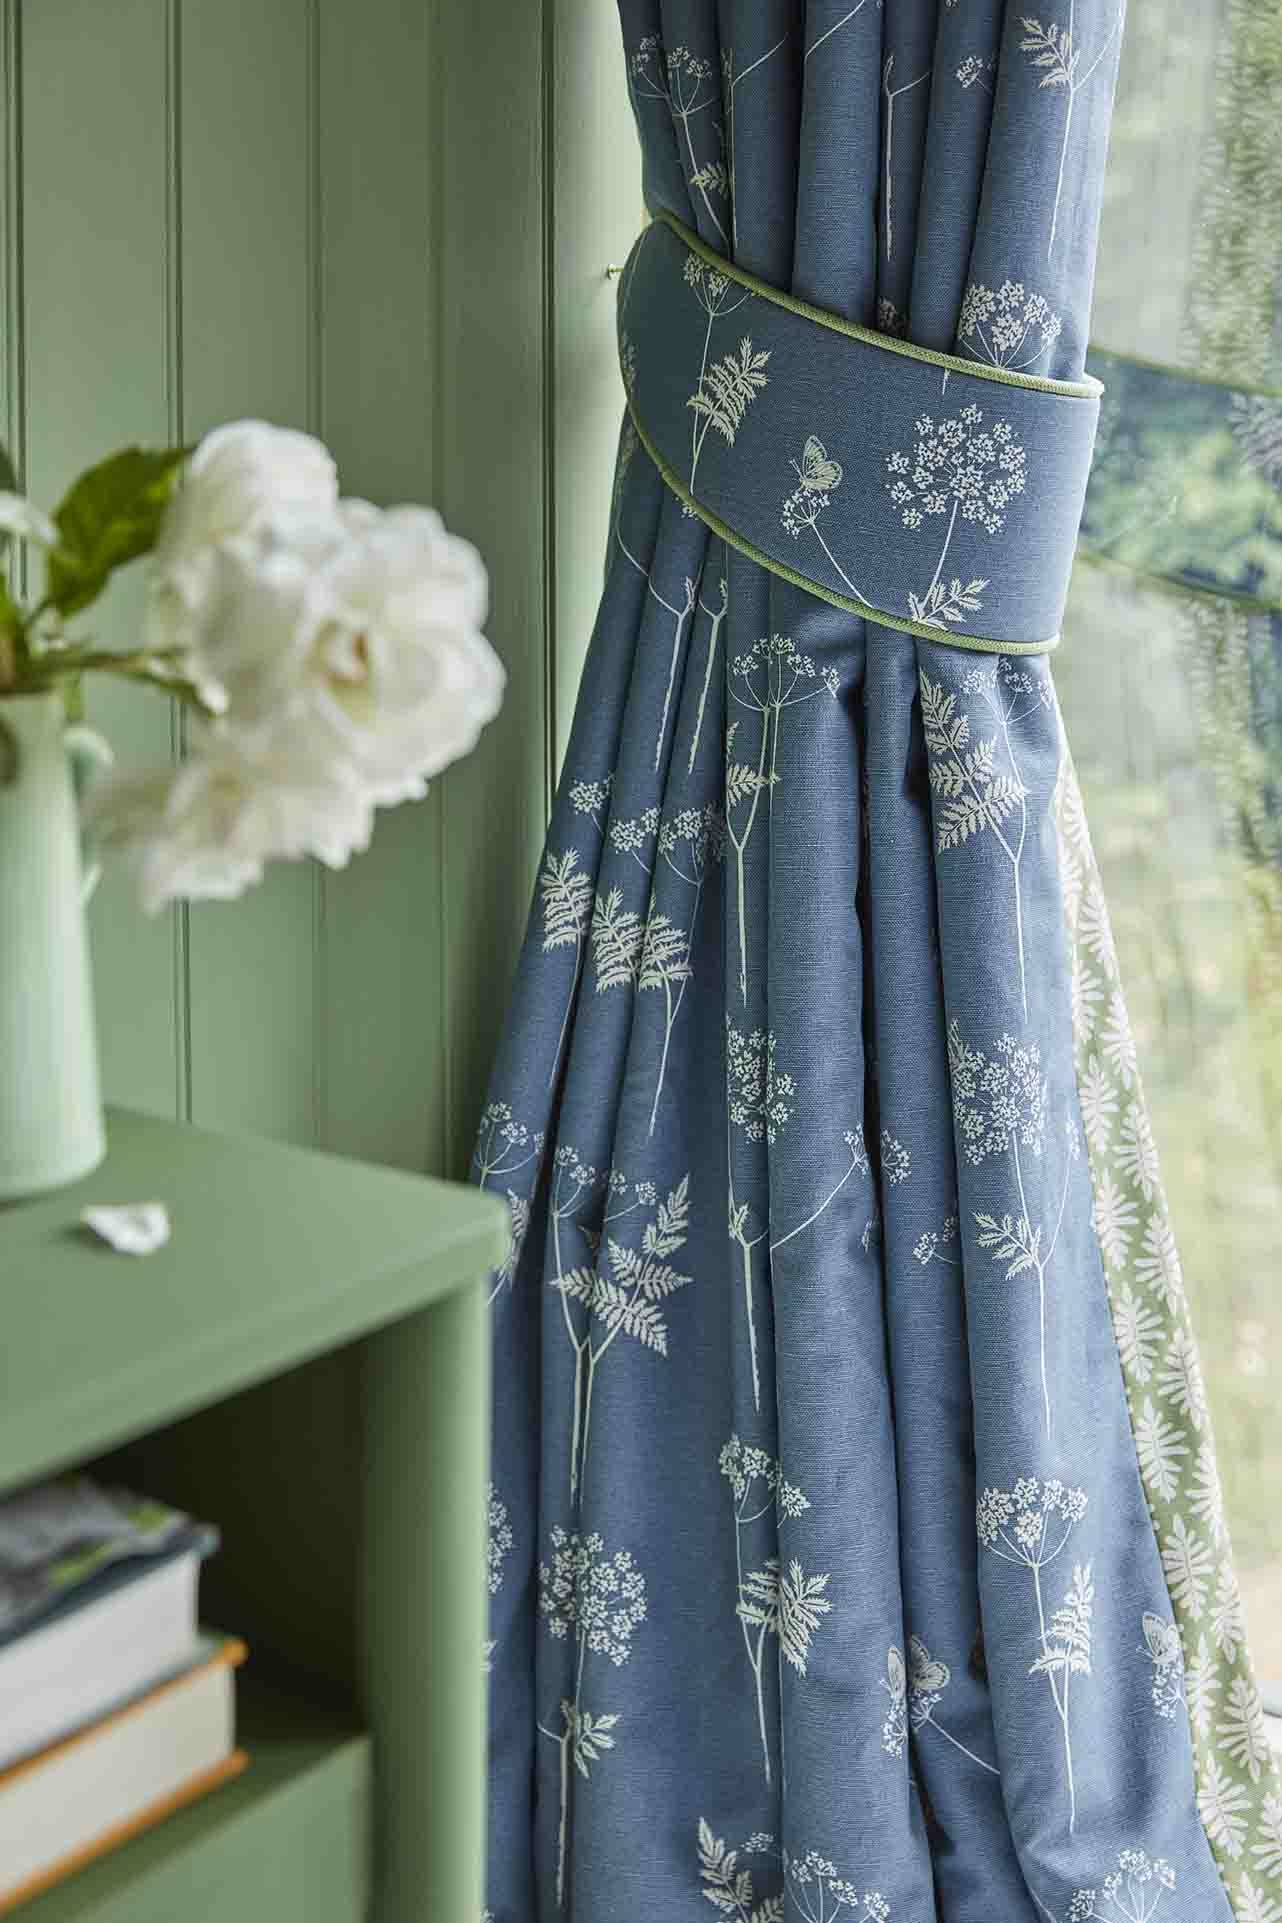 luxury curtains with a tieback